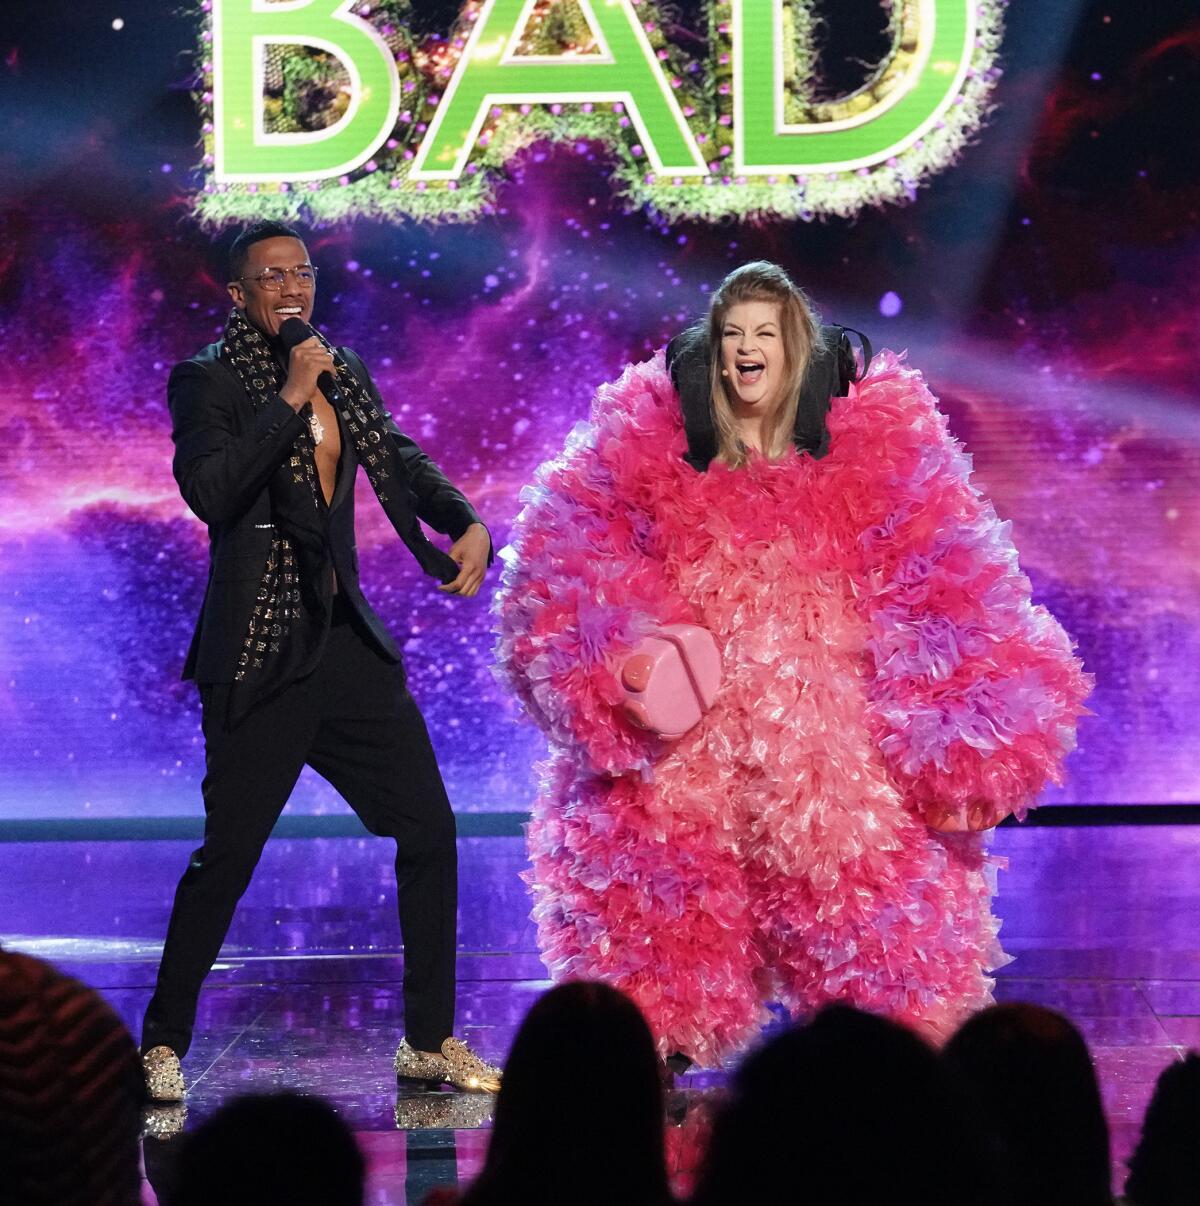 A man holding a microphone stands next to a woman wearing a fluffy pink costume on stage